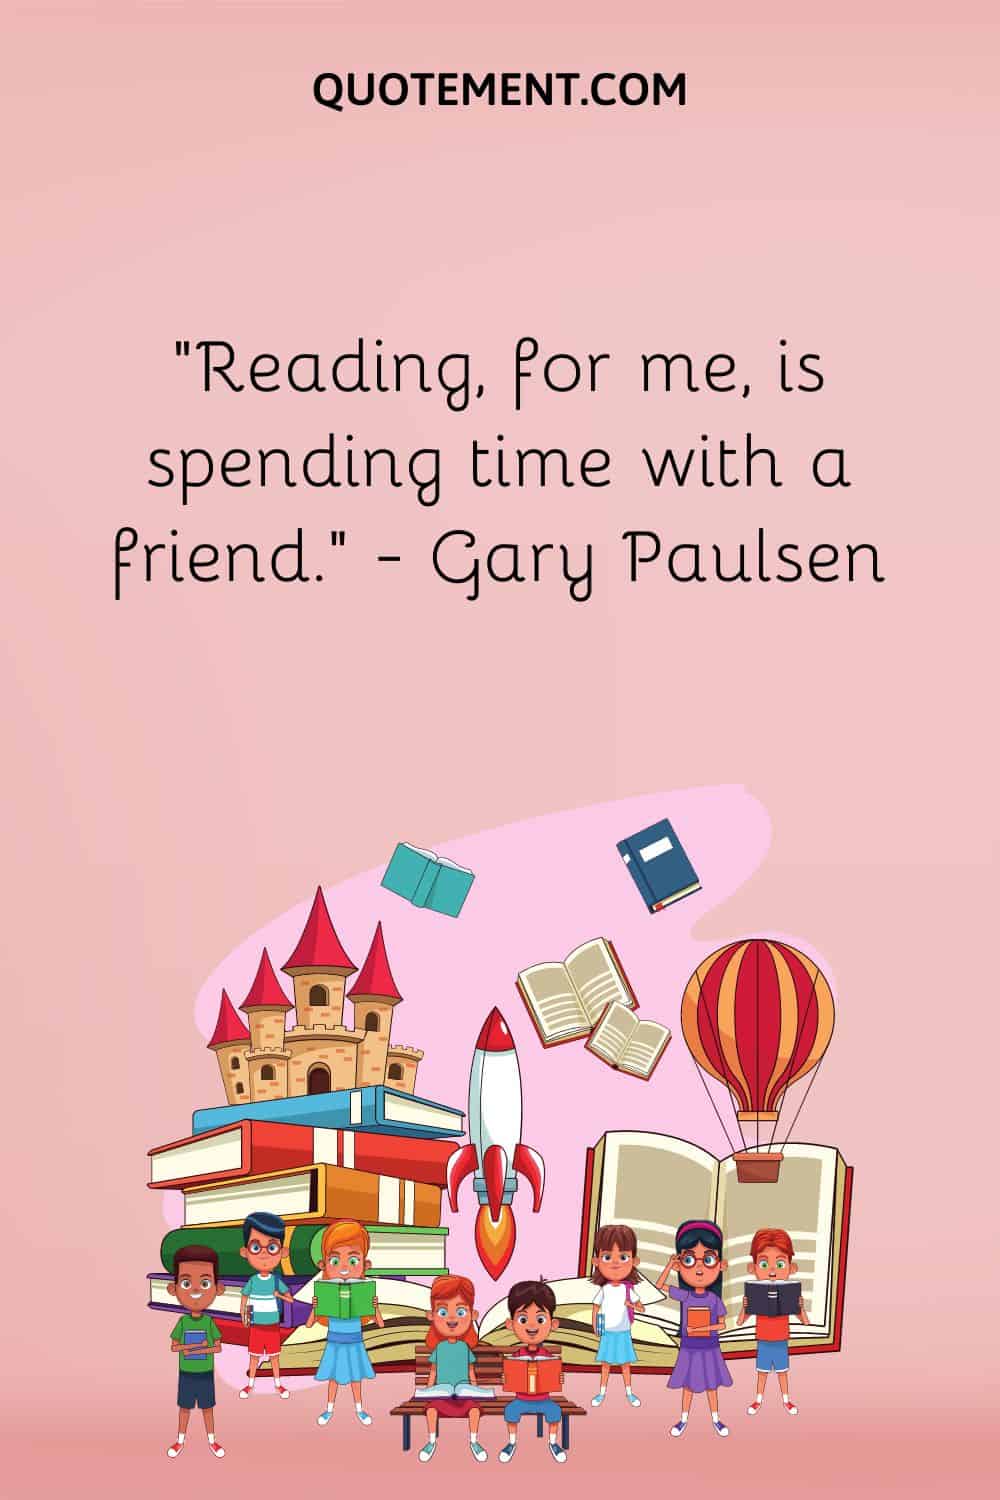 “Reading, for me, is spending time with a friend.” — Gary Paulsen